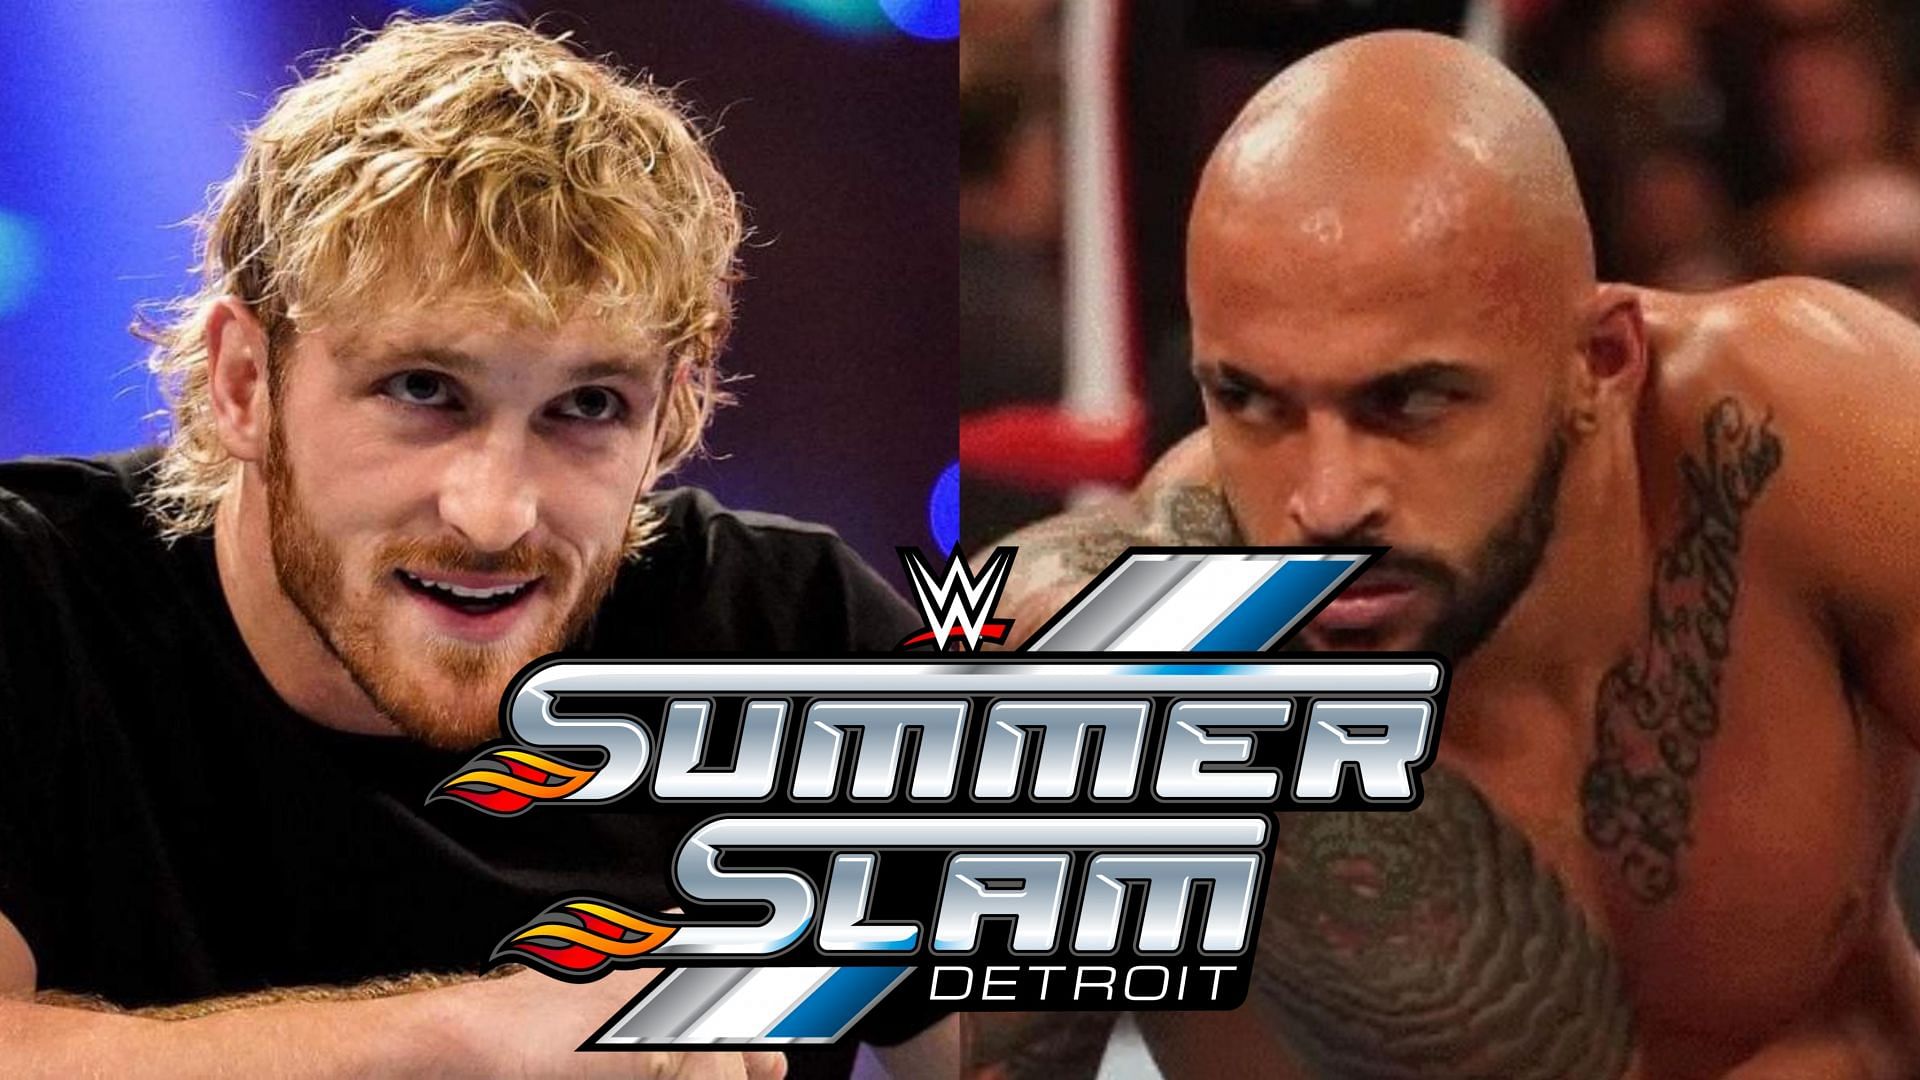 Will Logan Paul receive some outside aid in his match with Ricochet at SummerSlam?